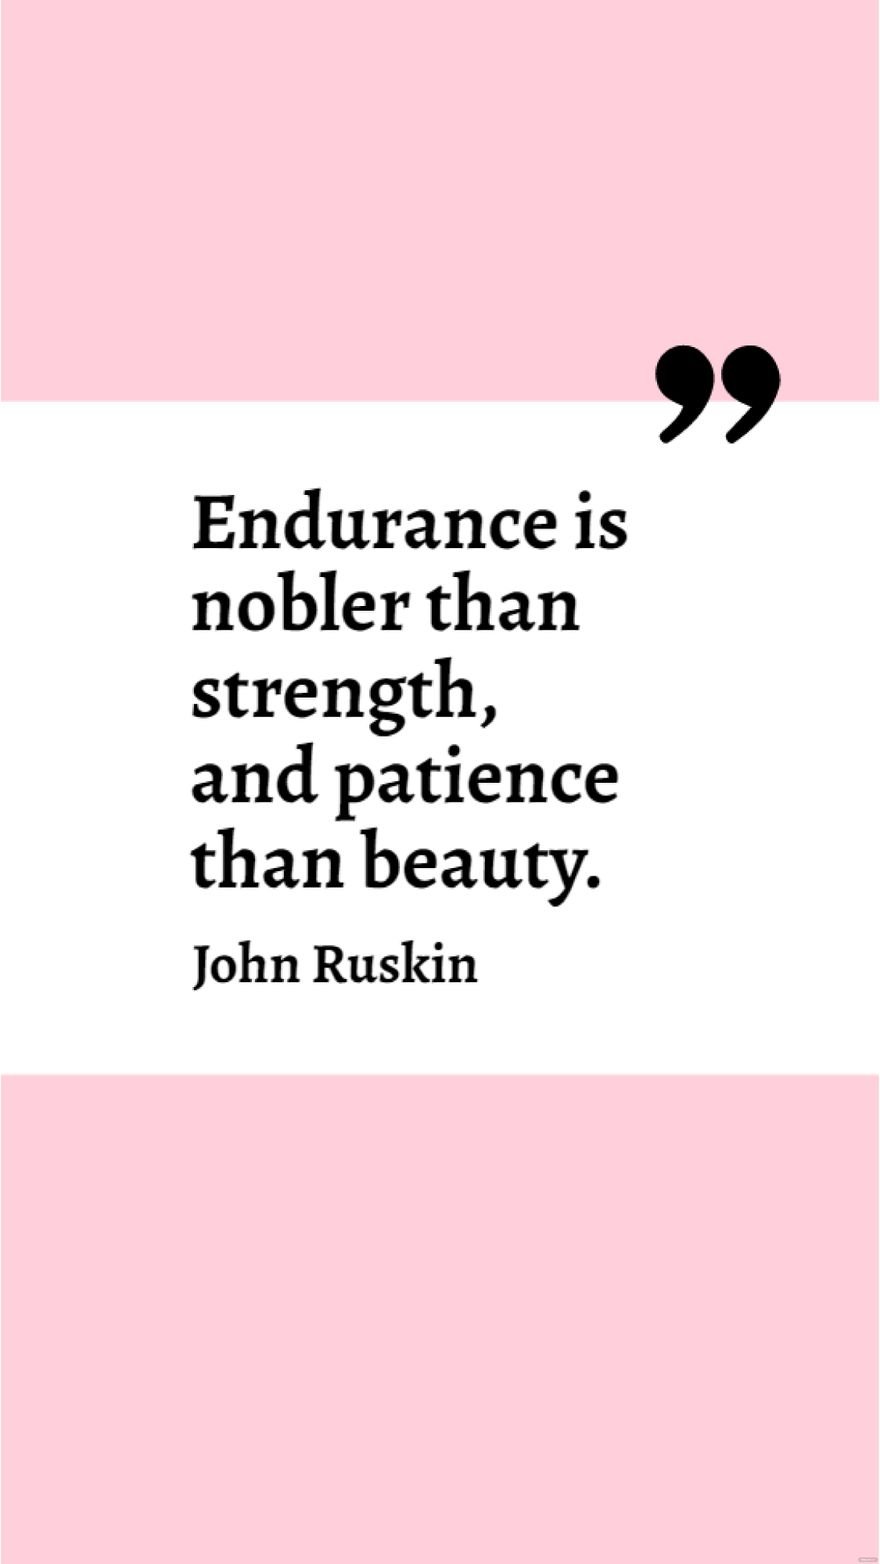 John Ruskin - Endurance is nobler than strength, and patience than beauty.